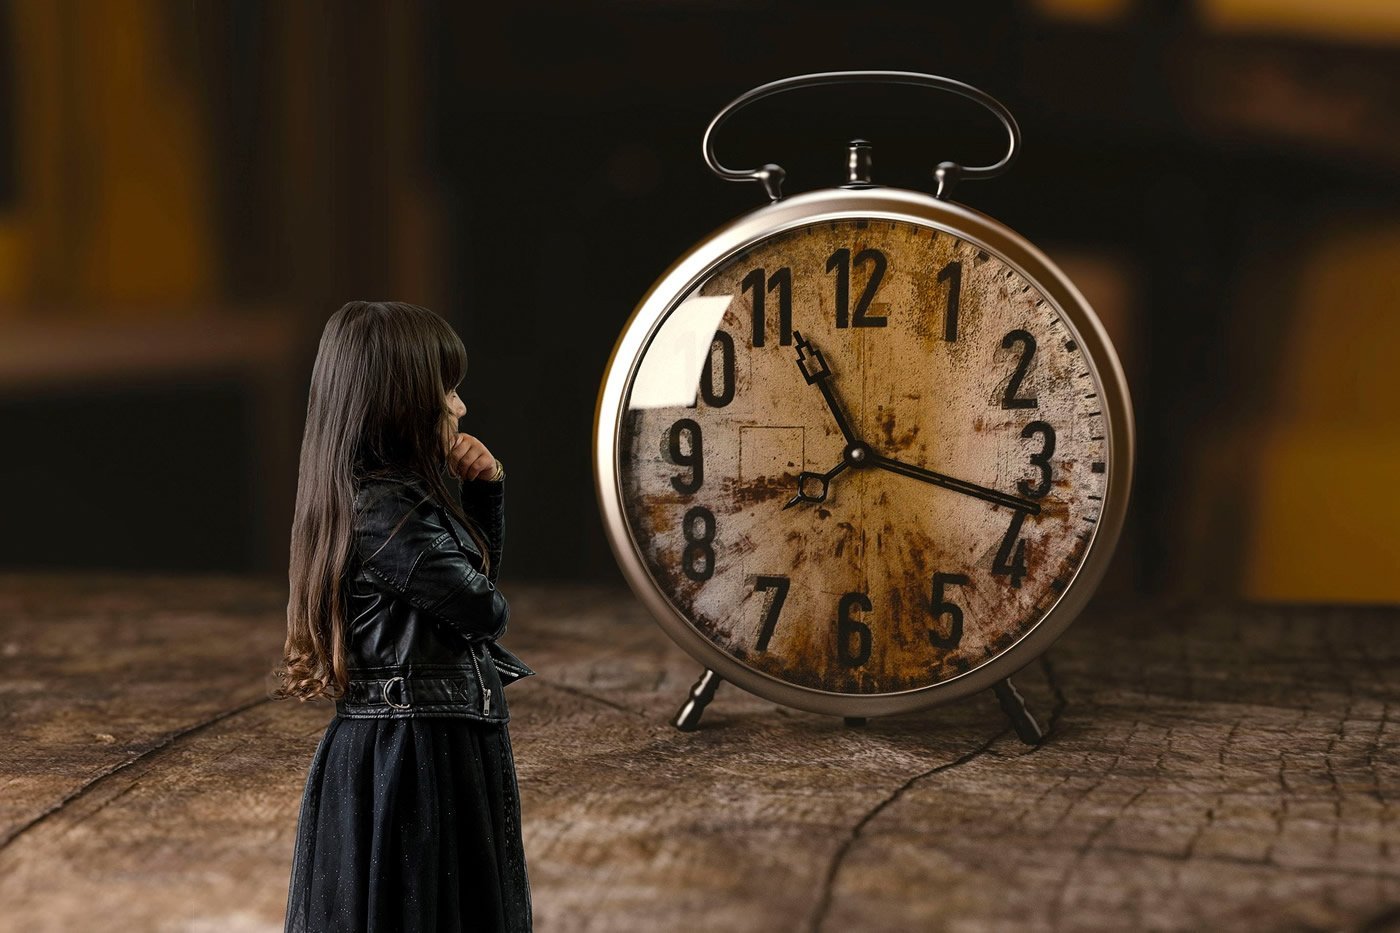 This shows a child and a clock